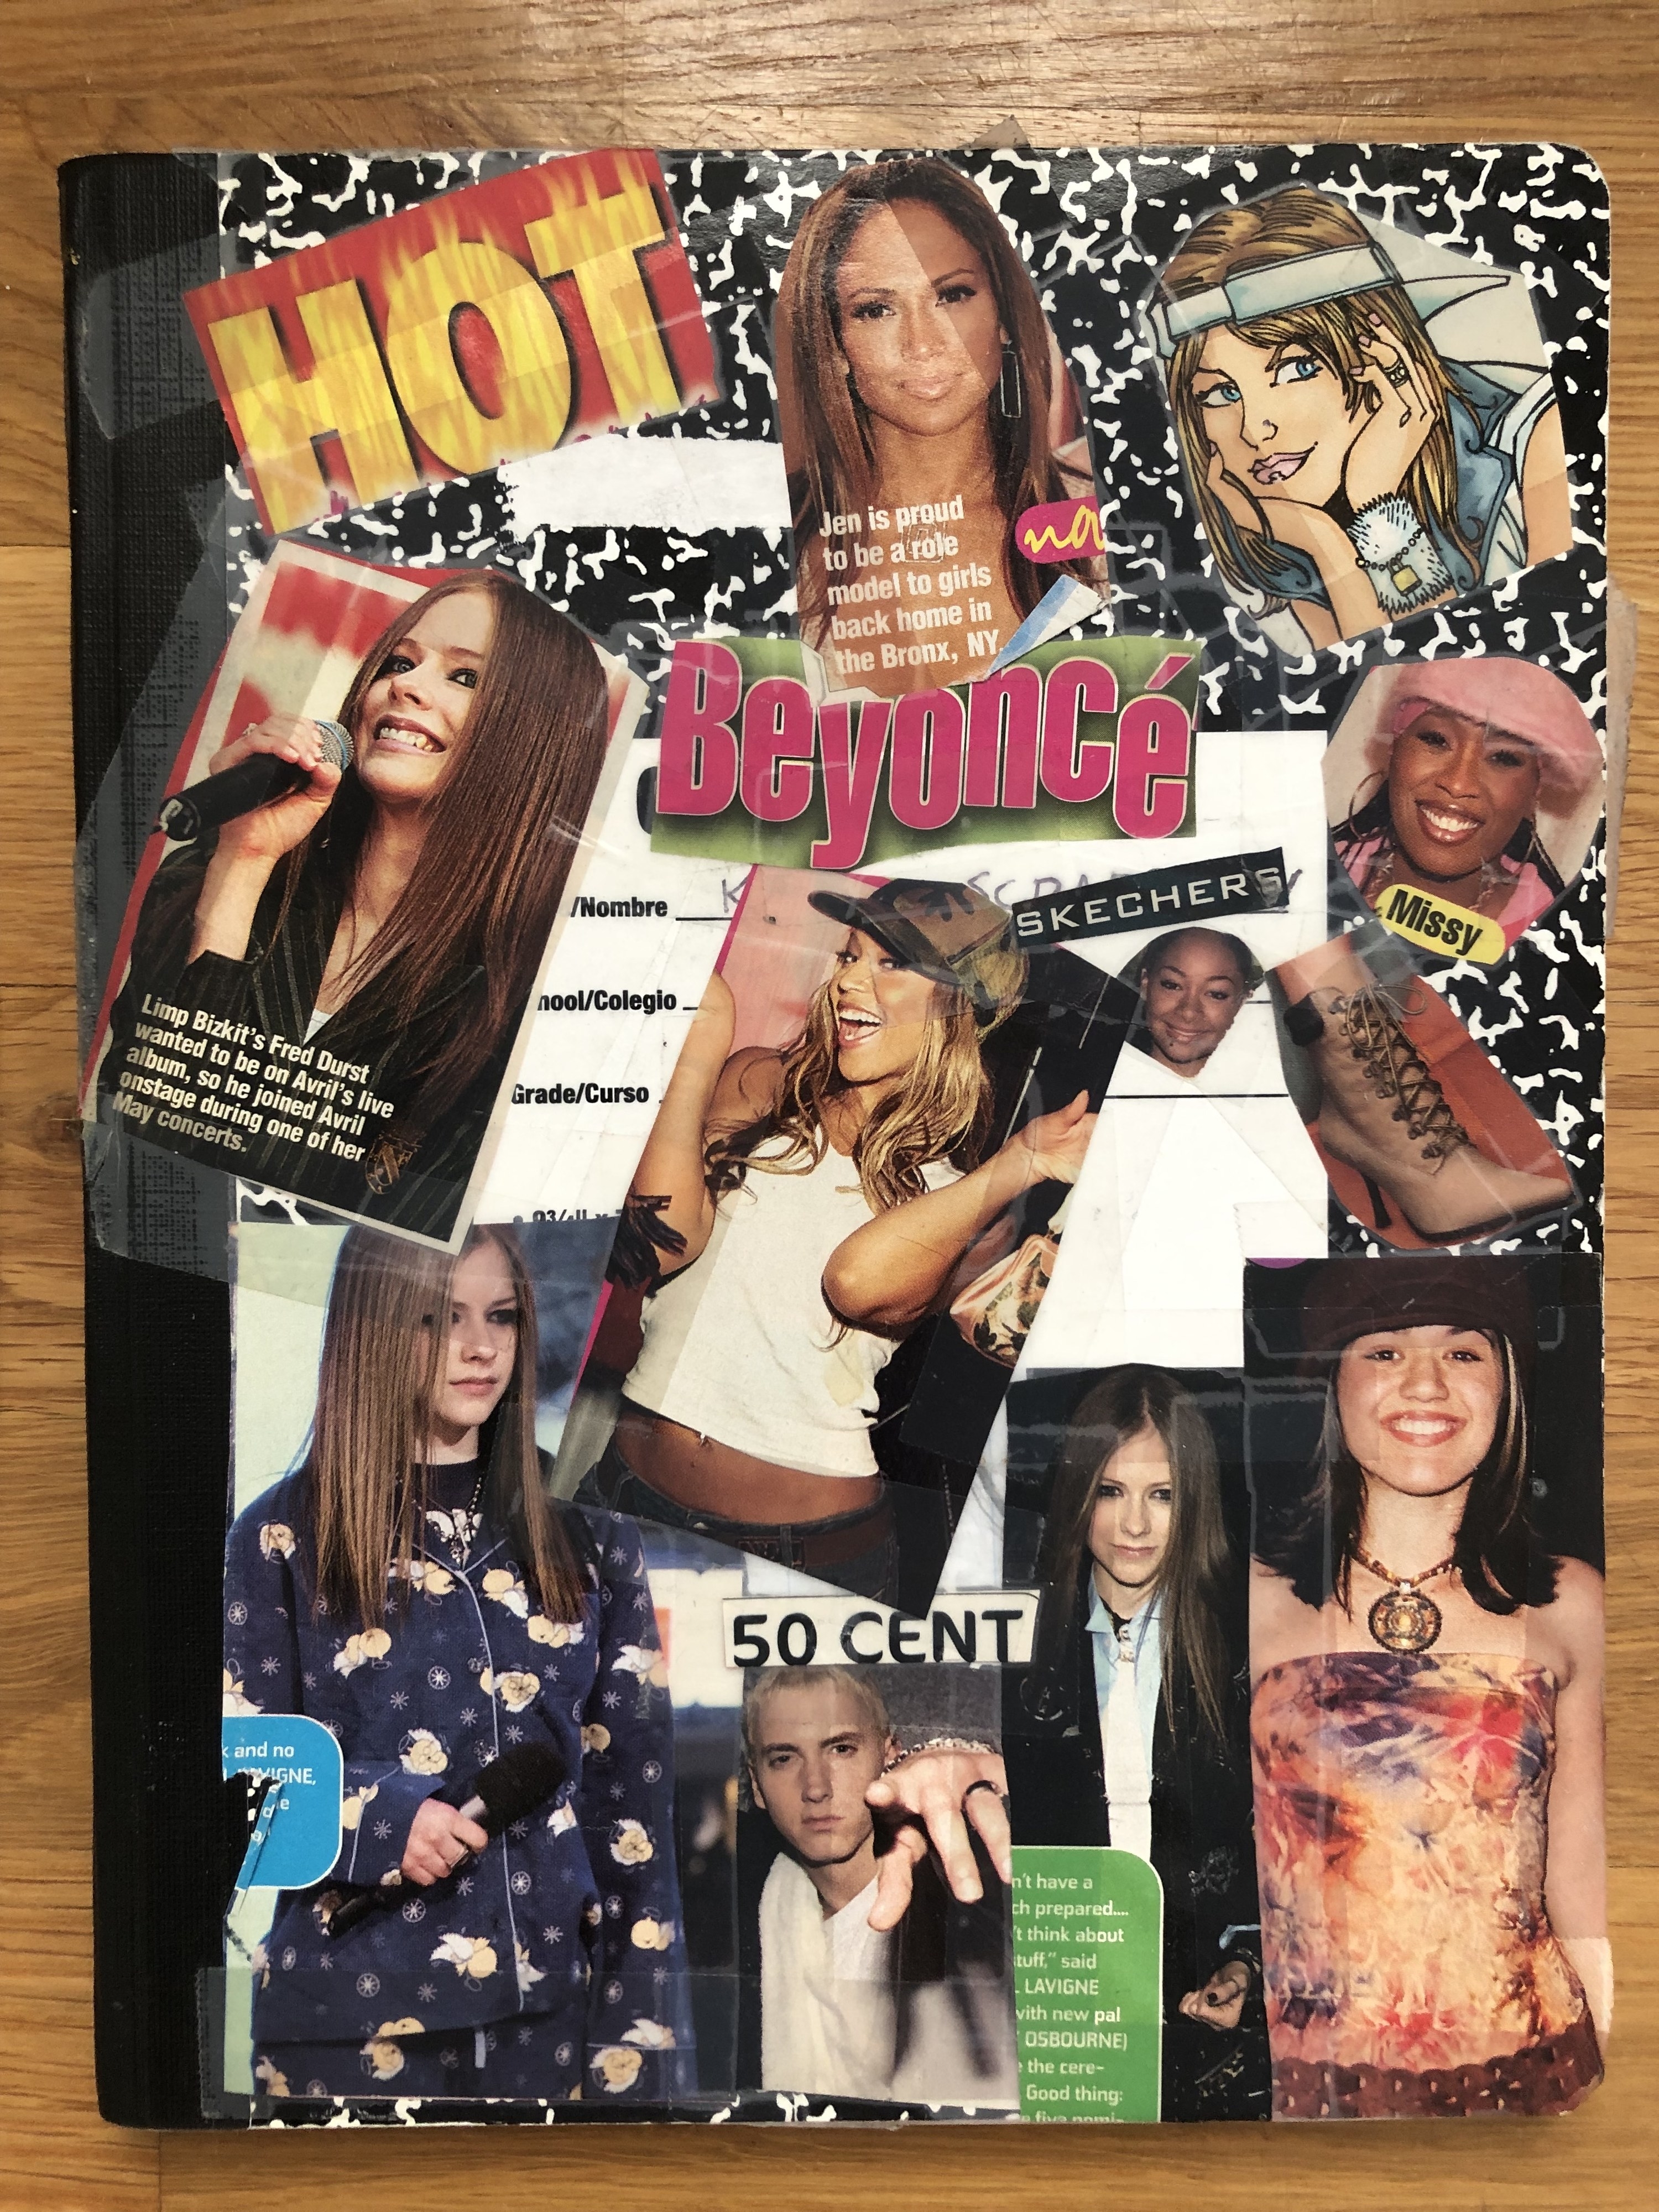 Other collage images include Eminem, Raven-Symoné, and a pair of laced-up boots